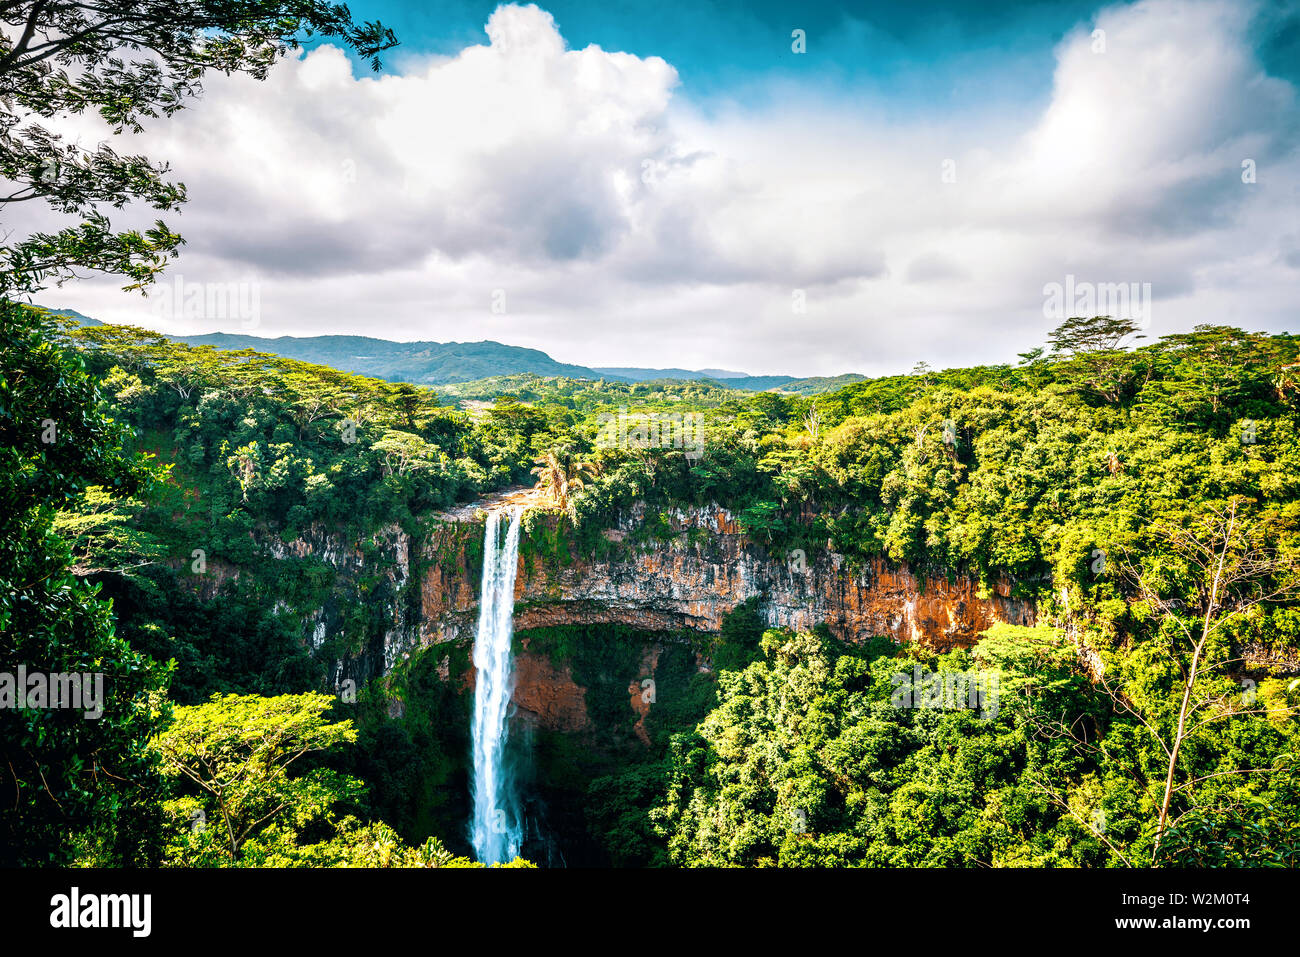 Chamarel waterfall inside the tropical paradise island of Mauritius. Toned image. Stock Photo